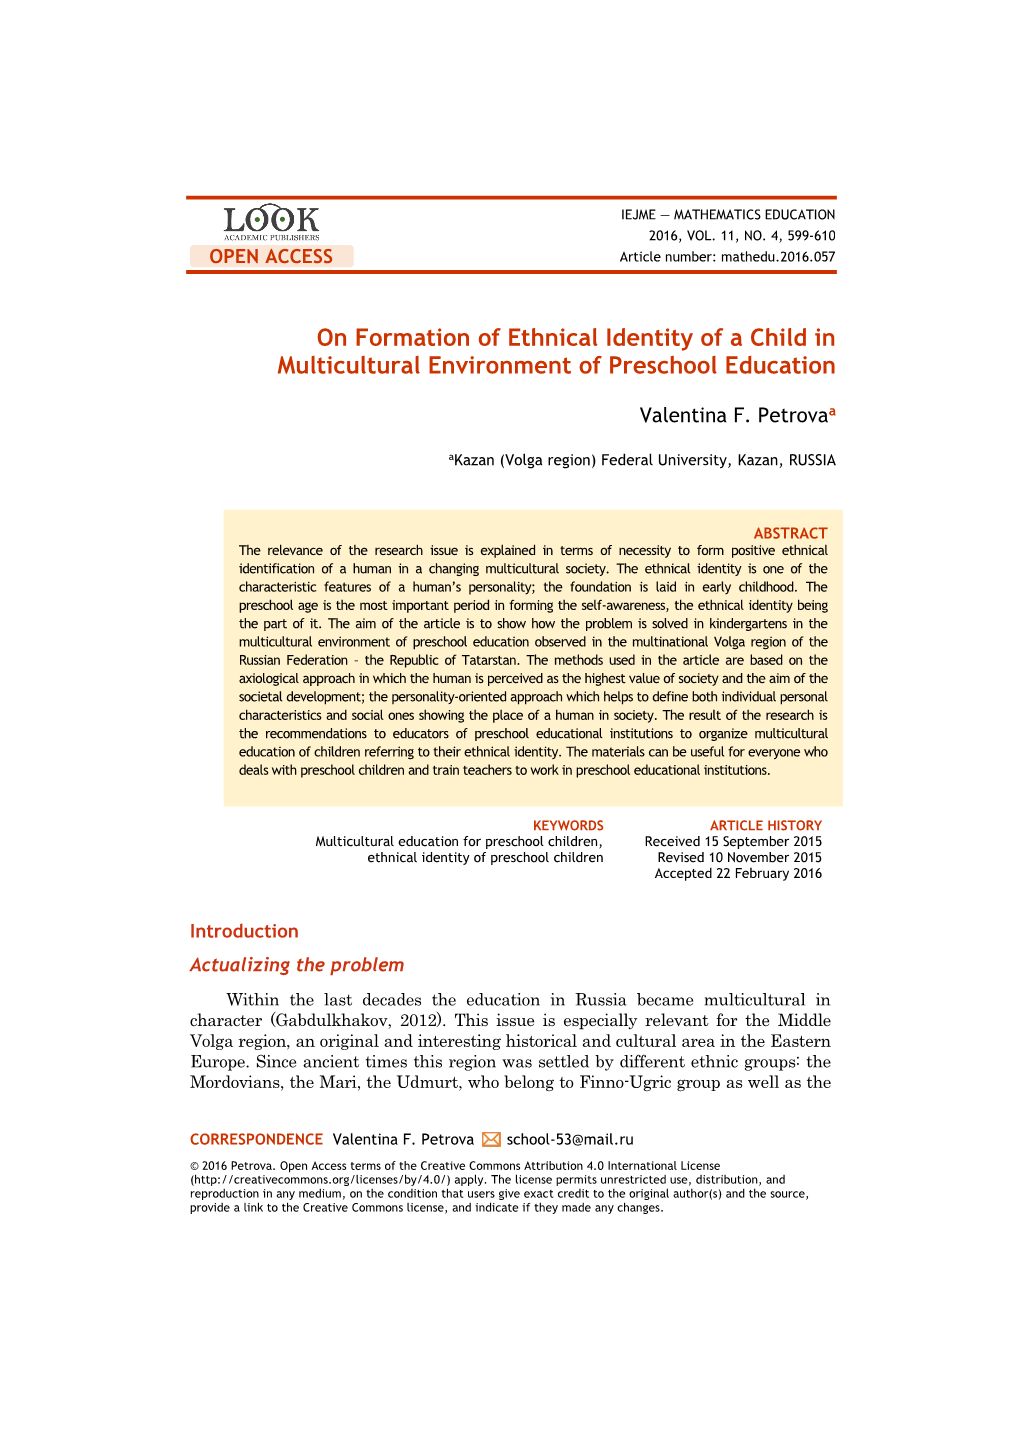 On Formation of Ethnical Identity of a Child in Multicultural Environment of Preschool Education